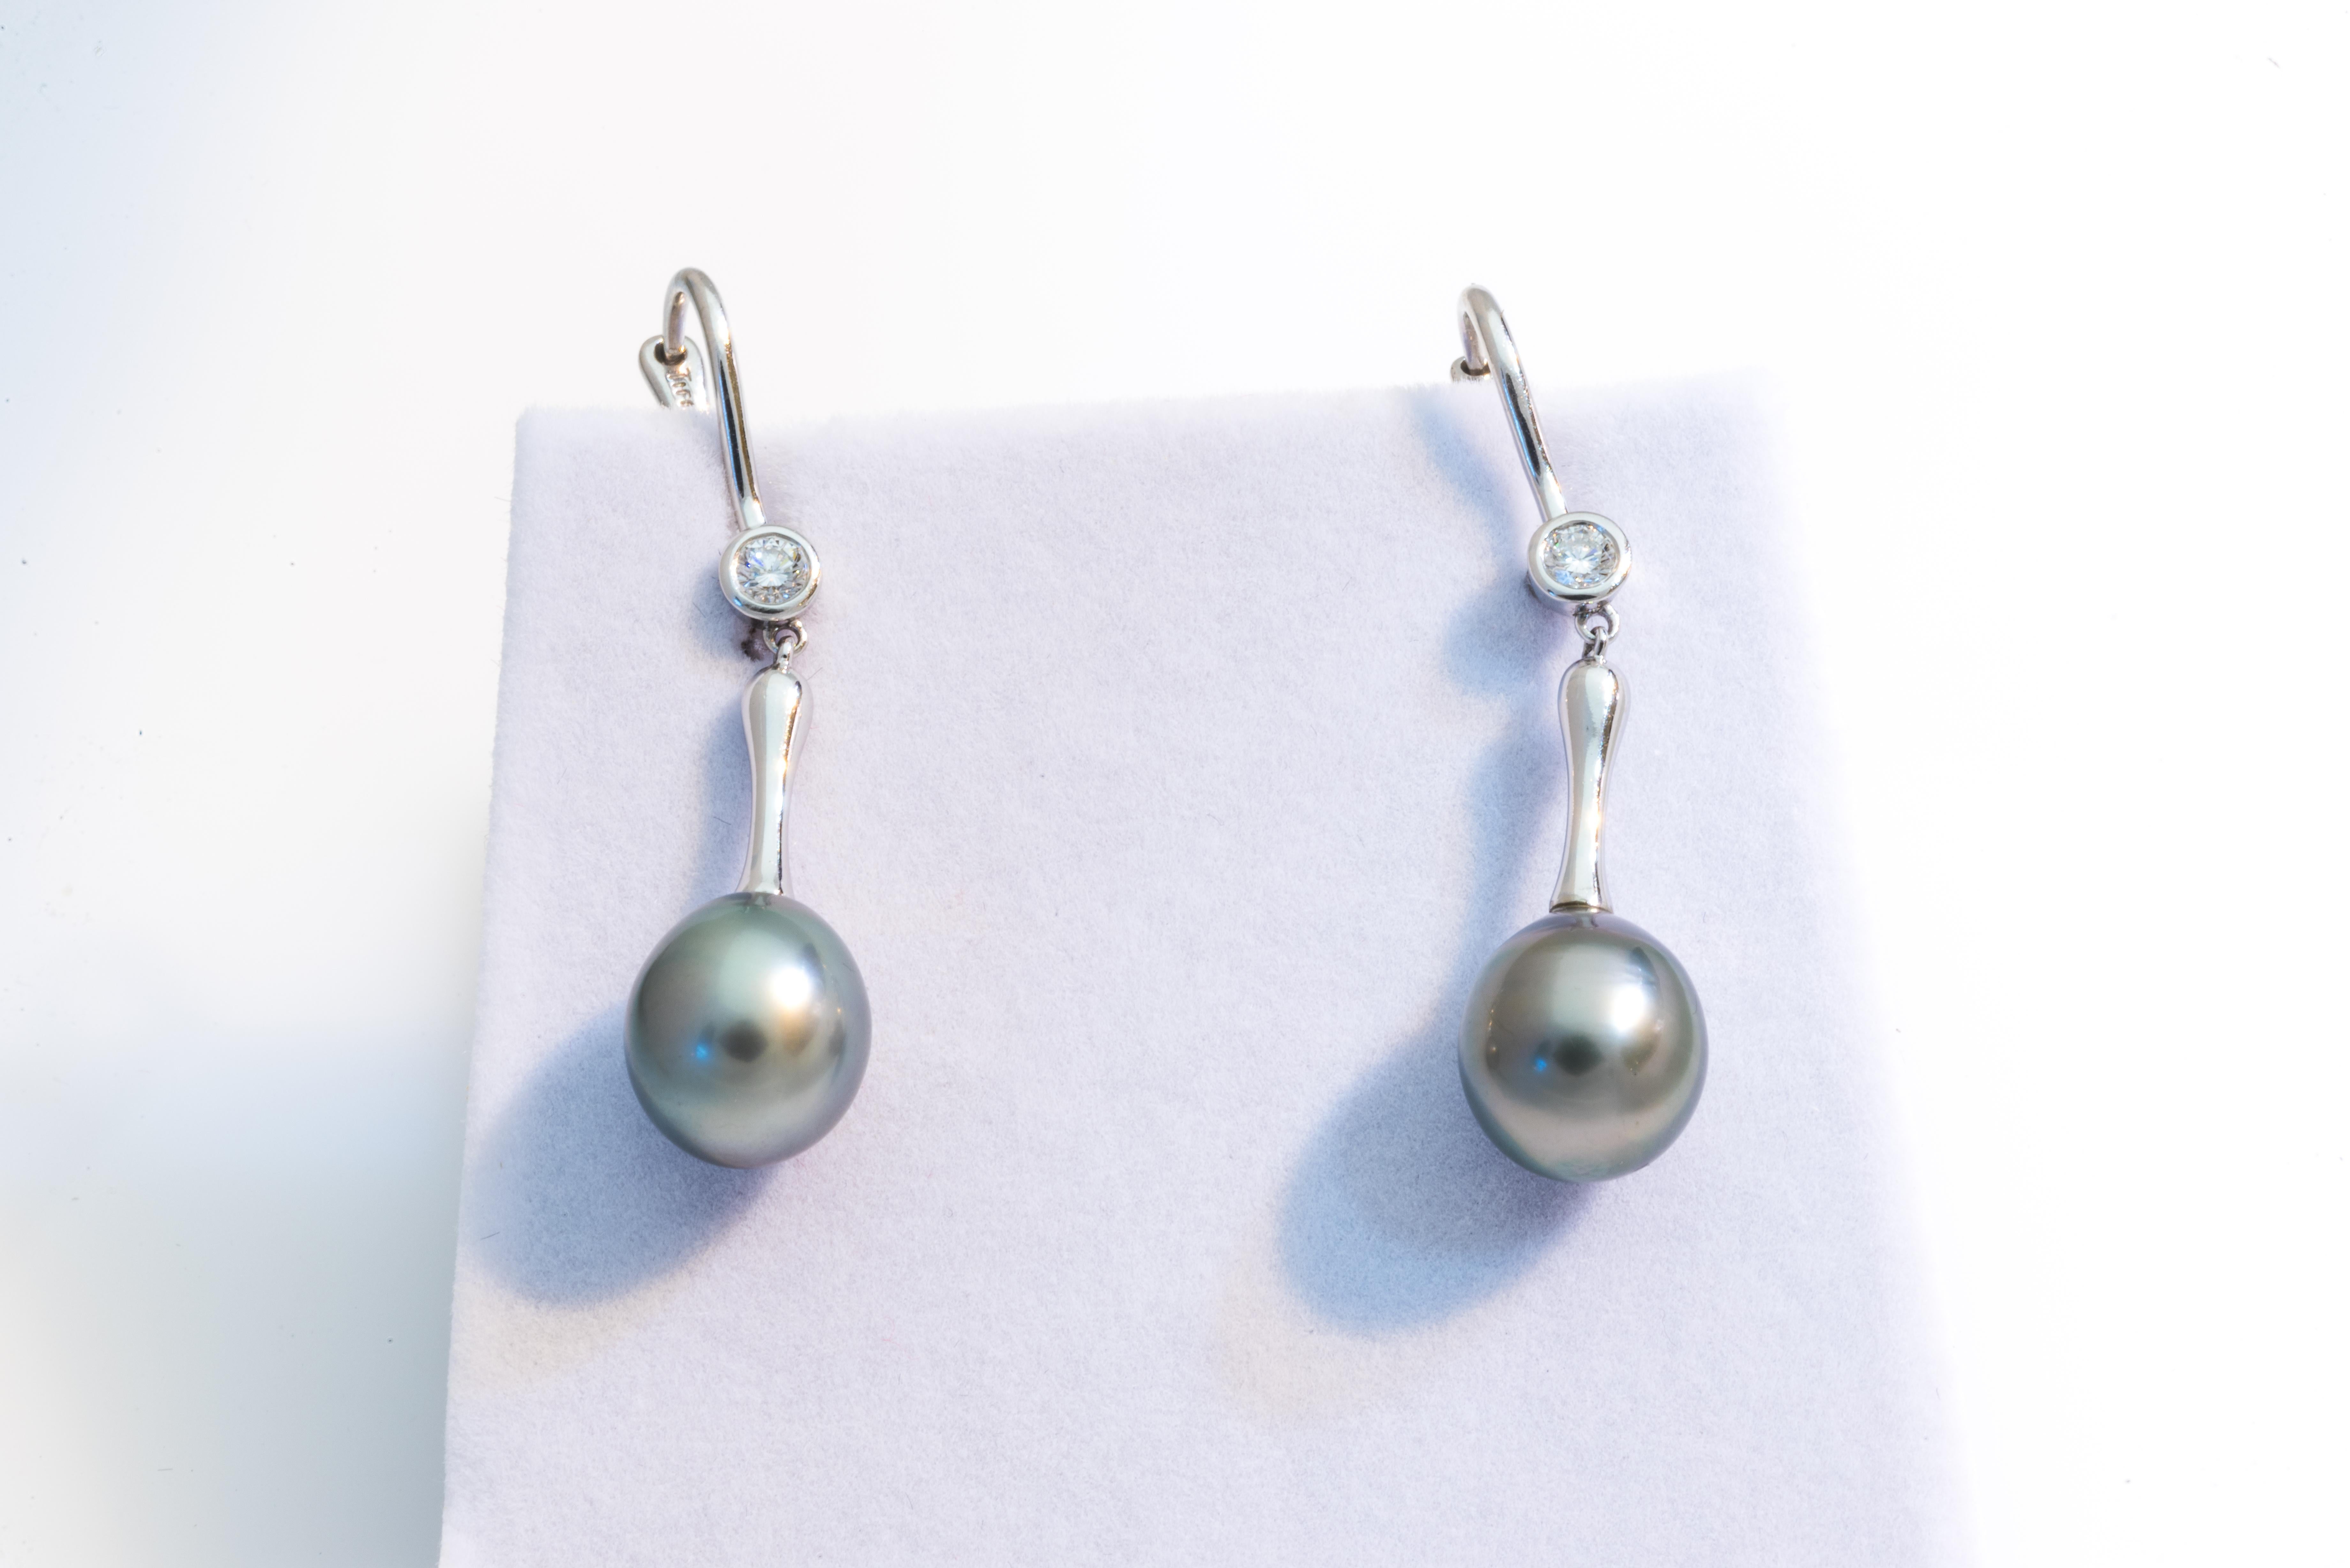 Discover the timeless allure of Tiffany earrings with an original design by Elsa Peretti. Crafted in platinum, these dangle earrings showcase Tahitian pearls and round brilliant diamonds, they measure out to 1.60 inches long and have a gross weight